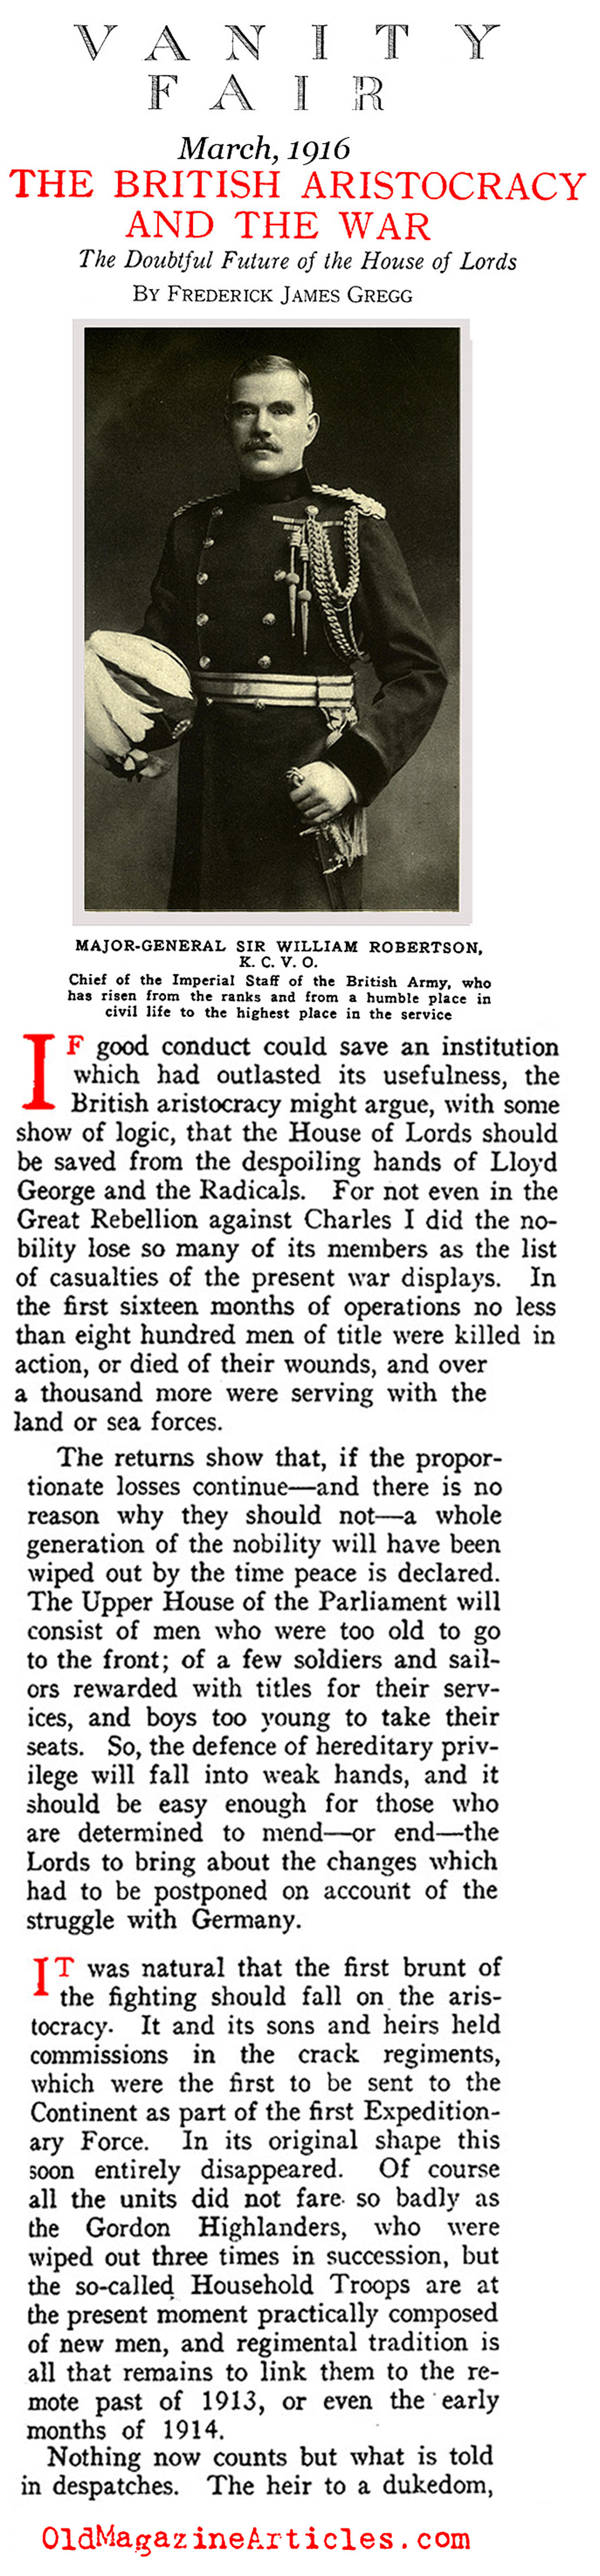 The British Aristocracy and the Great  War (Vanity Fair Magazine, 1916)